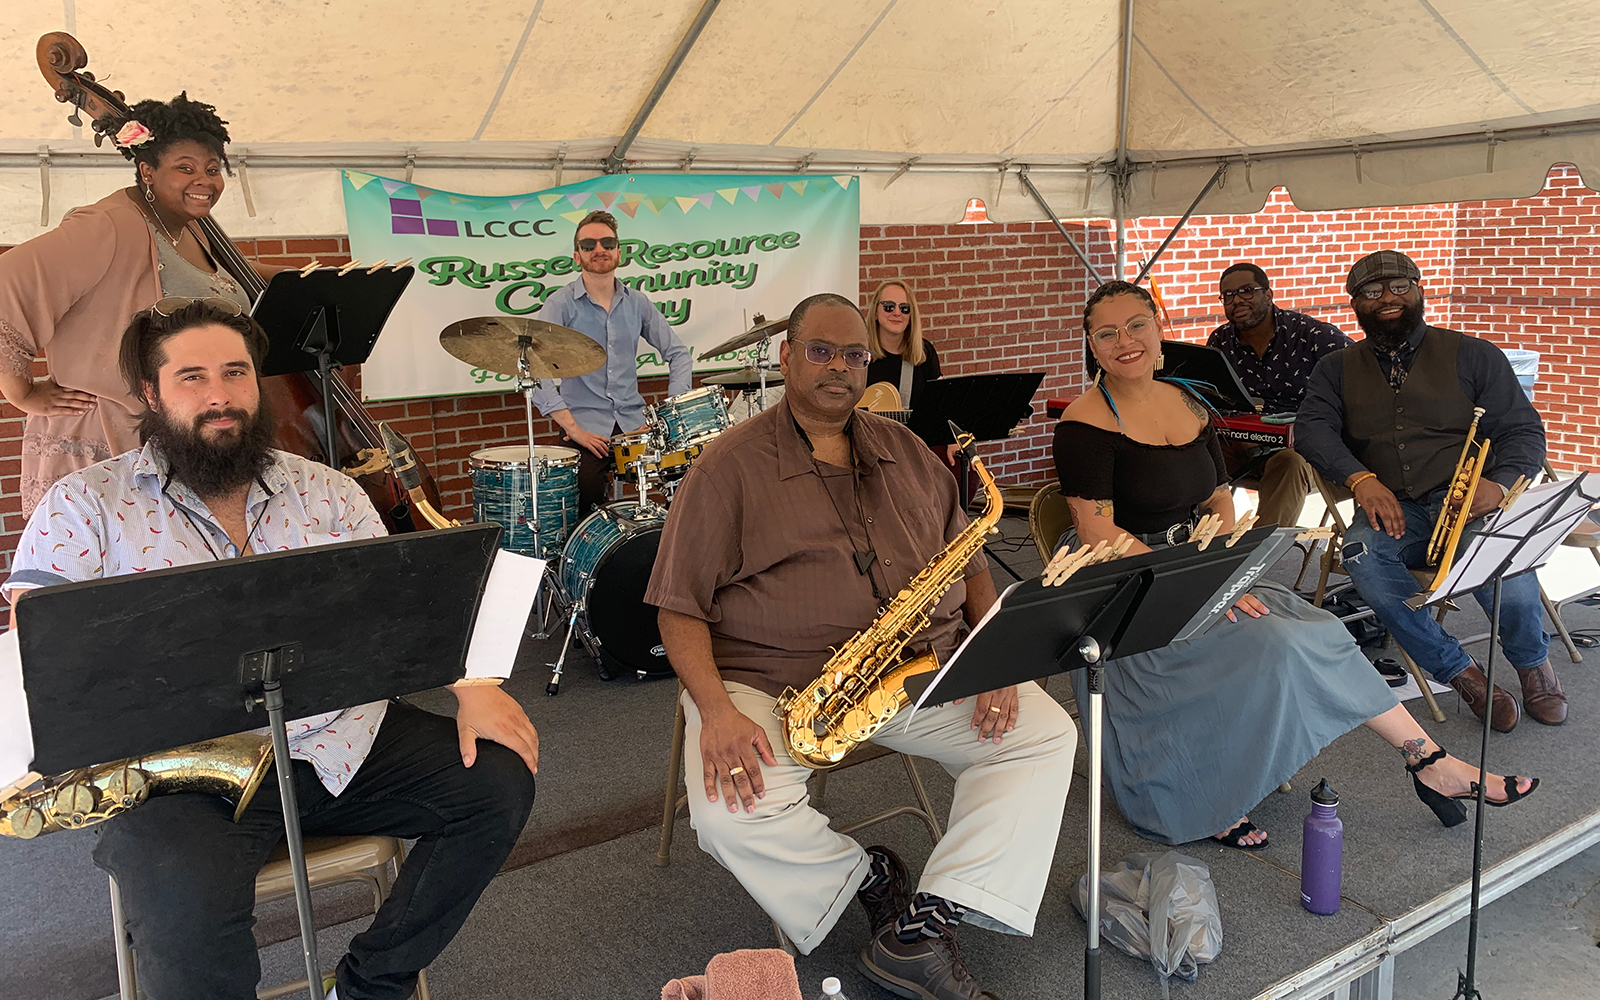 a diverse group of eight musicians with their instruments on a stage; a banner behind them reads "LCCC: Russell Resource Community Day"